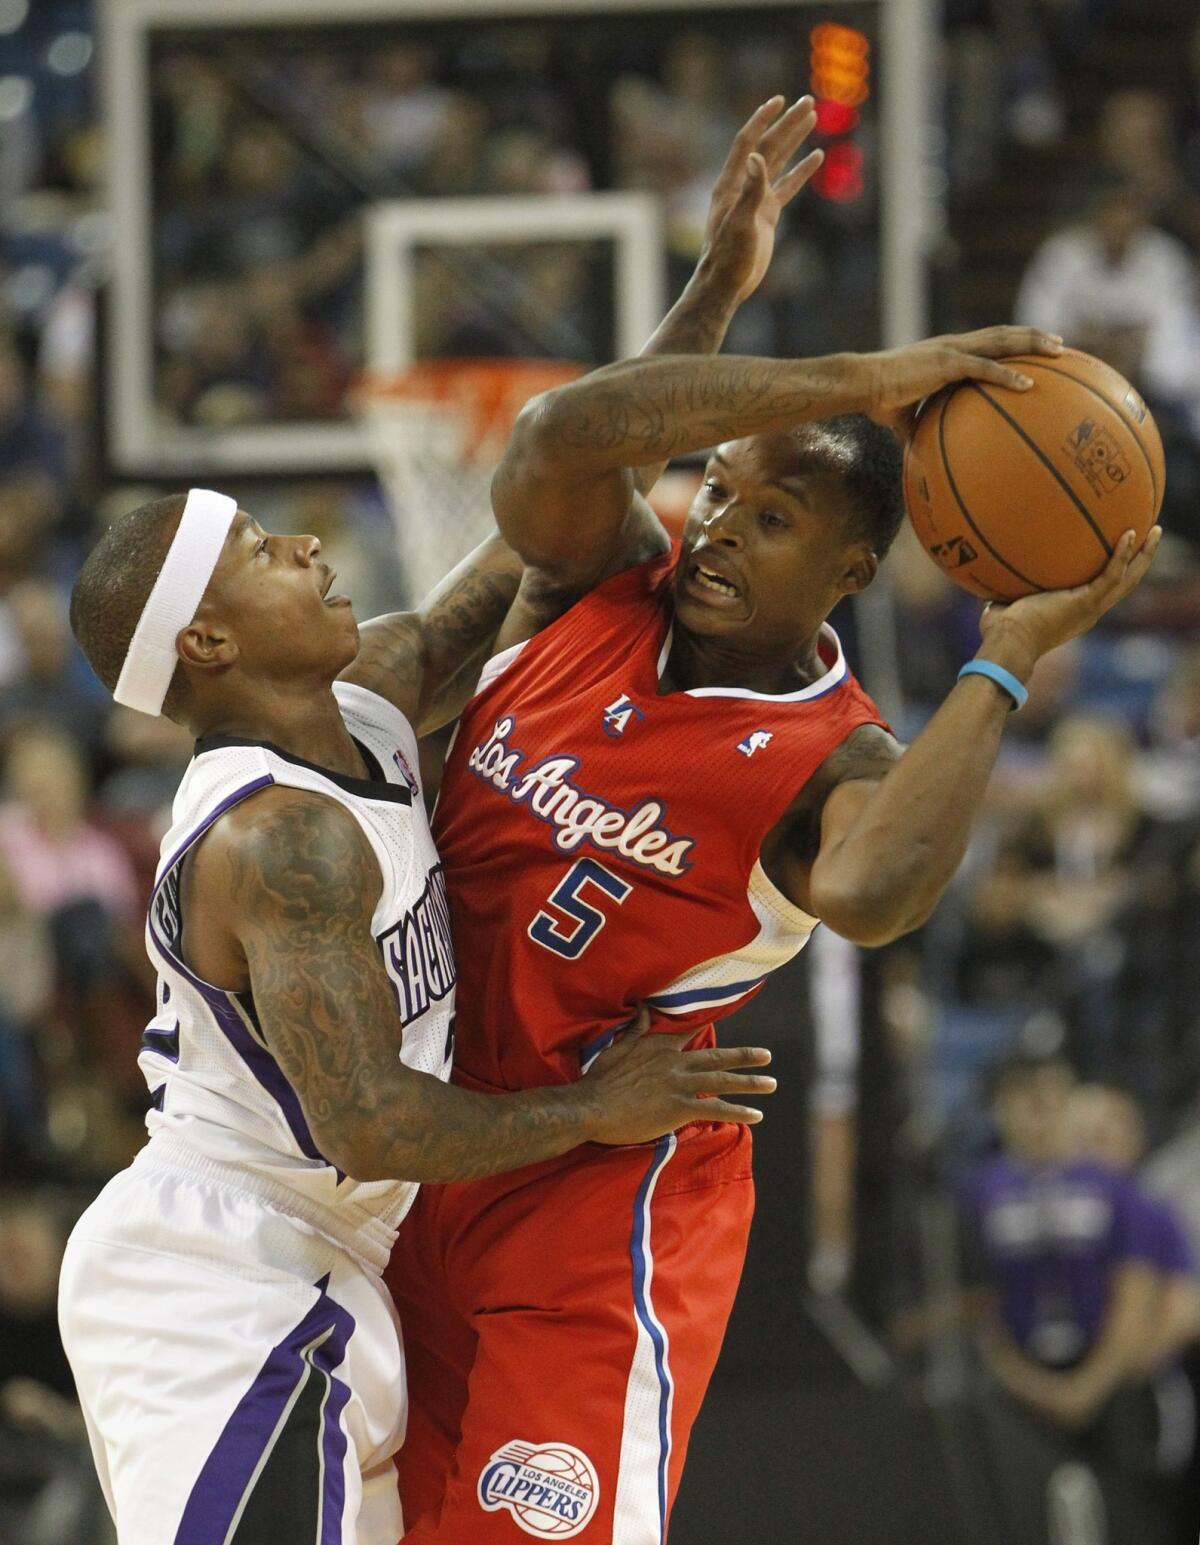 Clippers guard Maalik Wayns, right, is pressured by Sacramento guard Isaiah Thomas during the first quarter of the Clippers 99-88 preseason loss Monday.